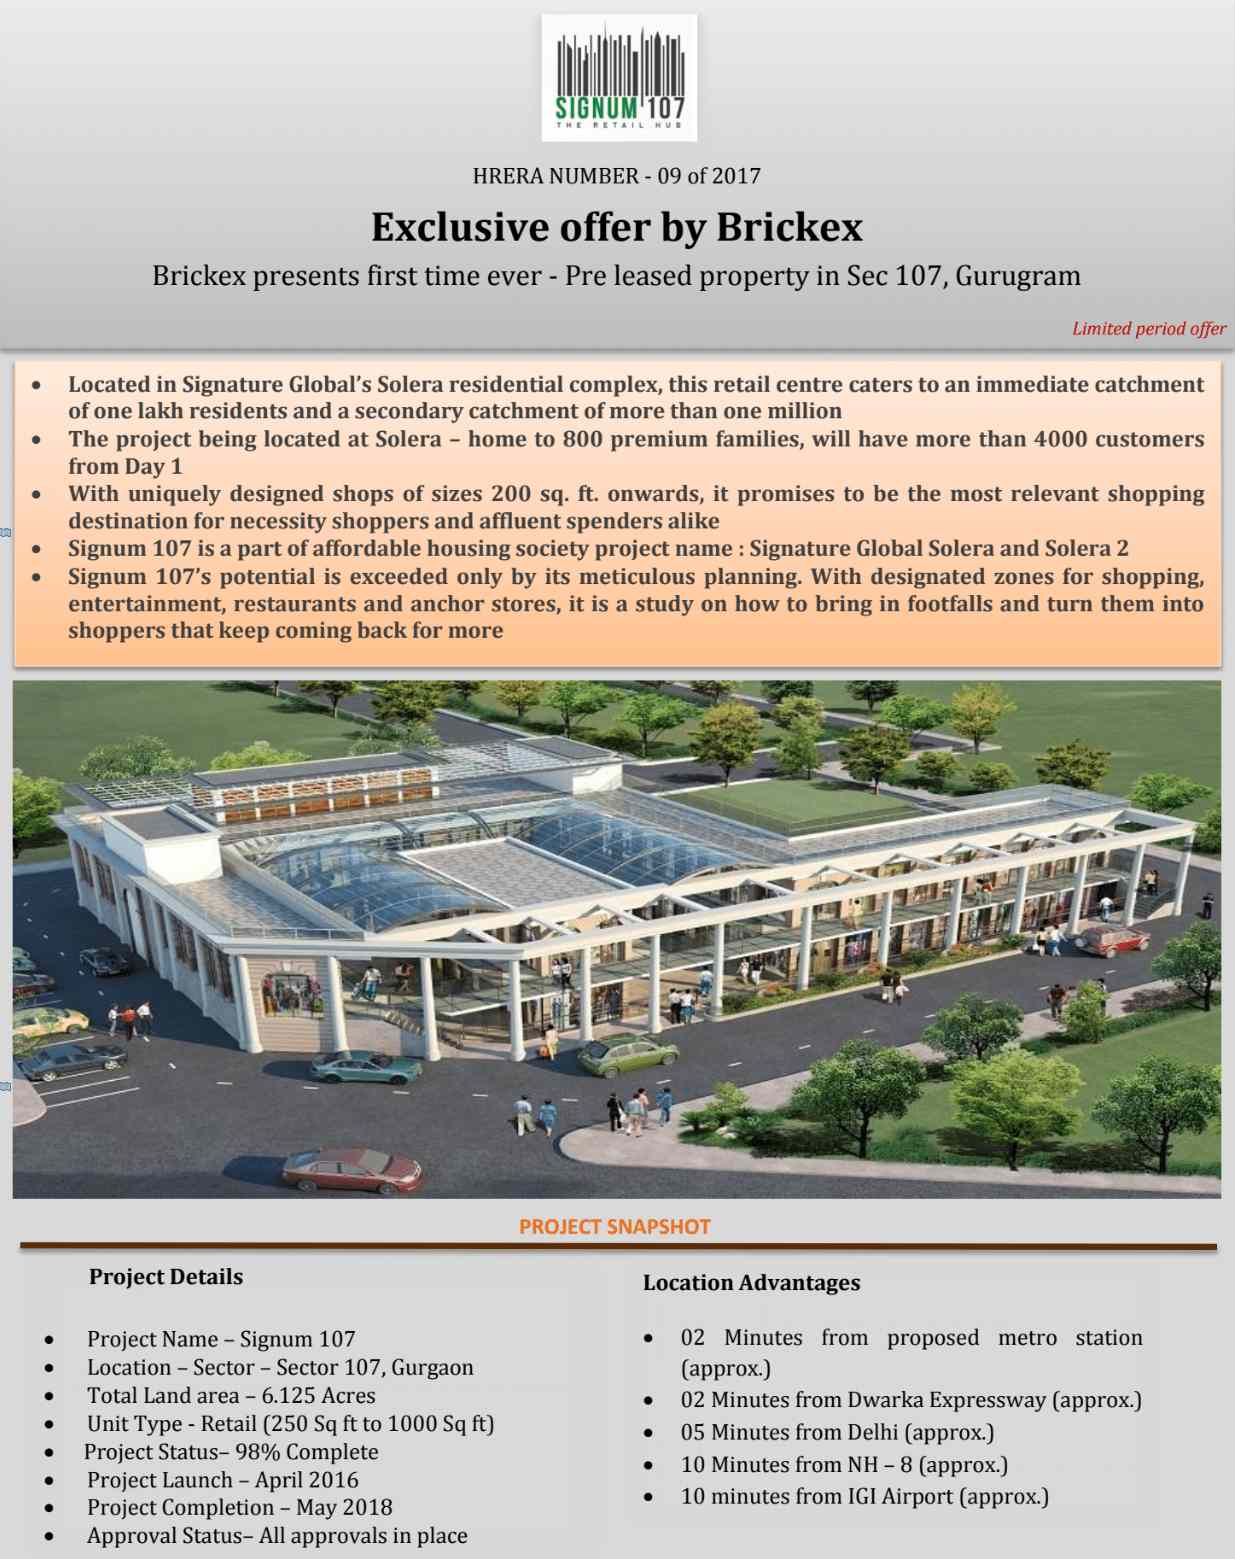 Signature Signum 107 - First ever pre-leased commercial property in Gurgaon